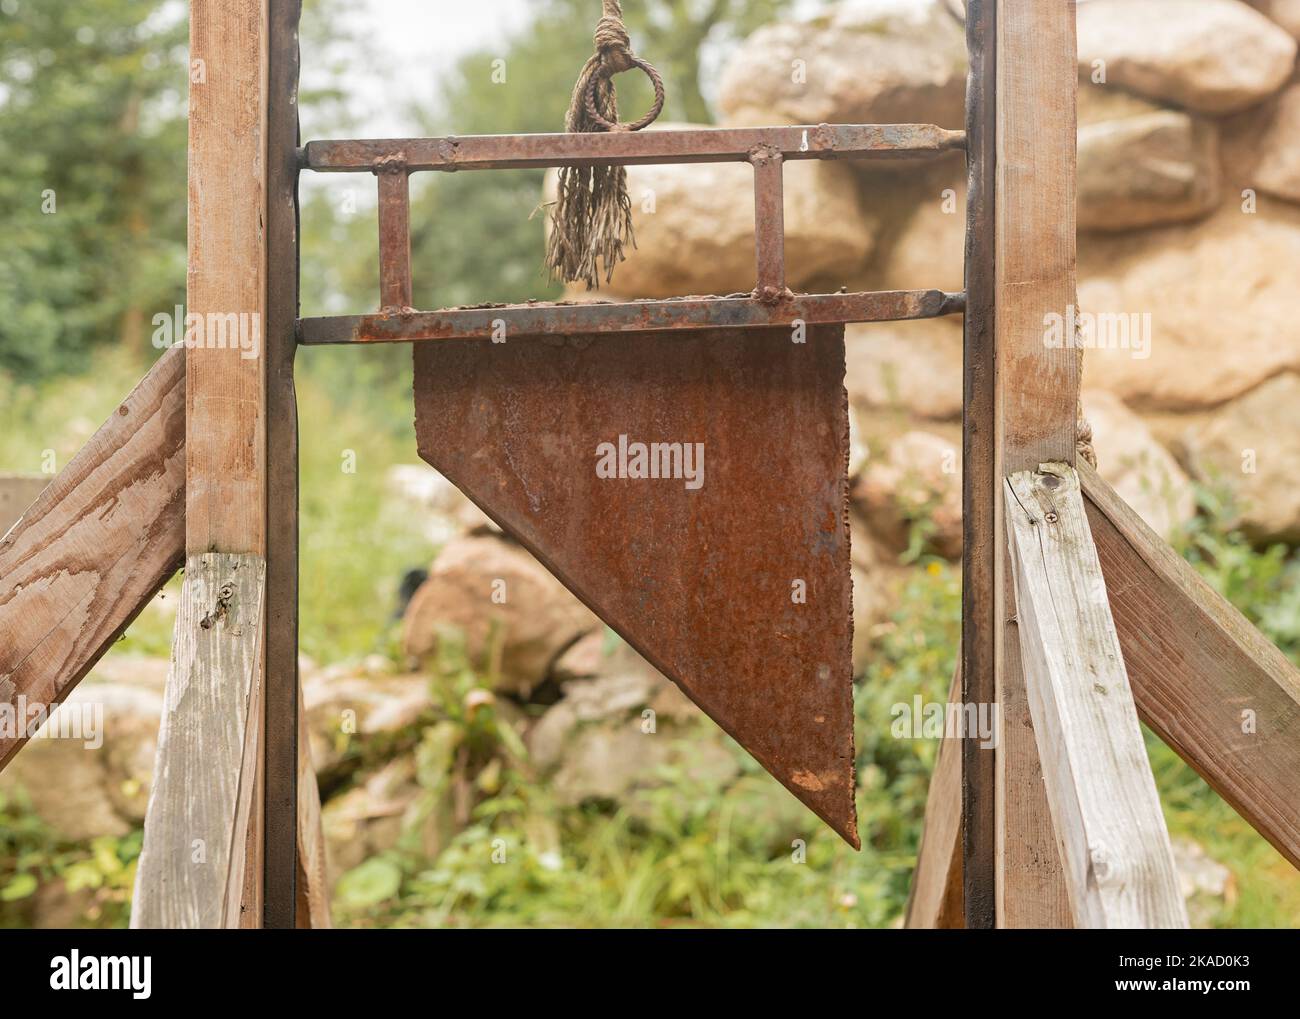 Guillotine, medieval decapitated equipment for punishment, blade closeup. Stock Photo